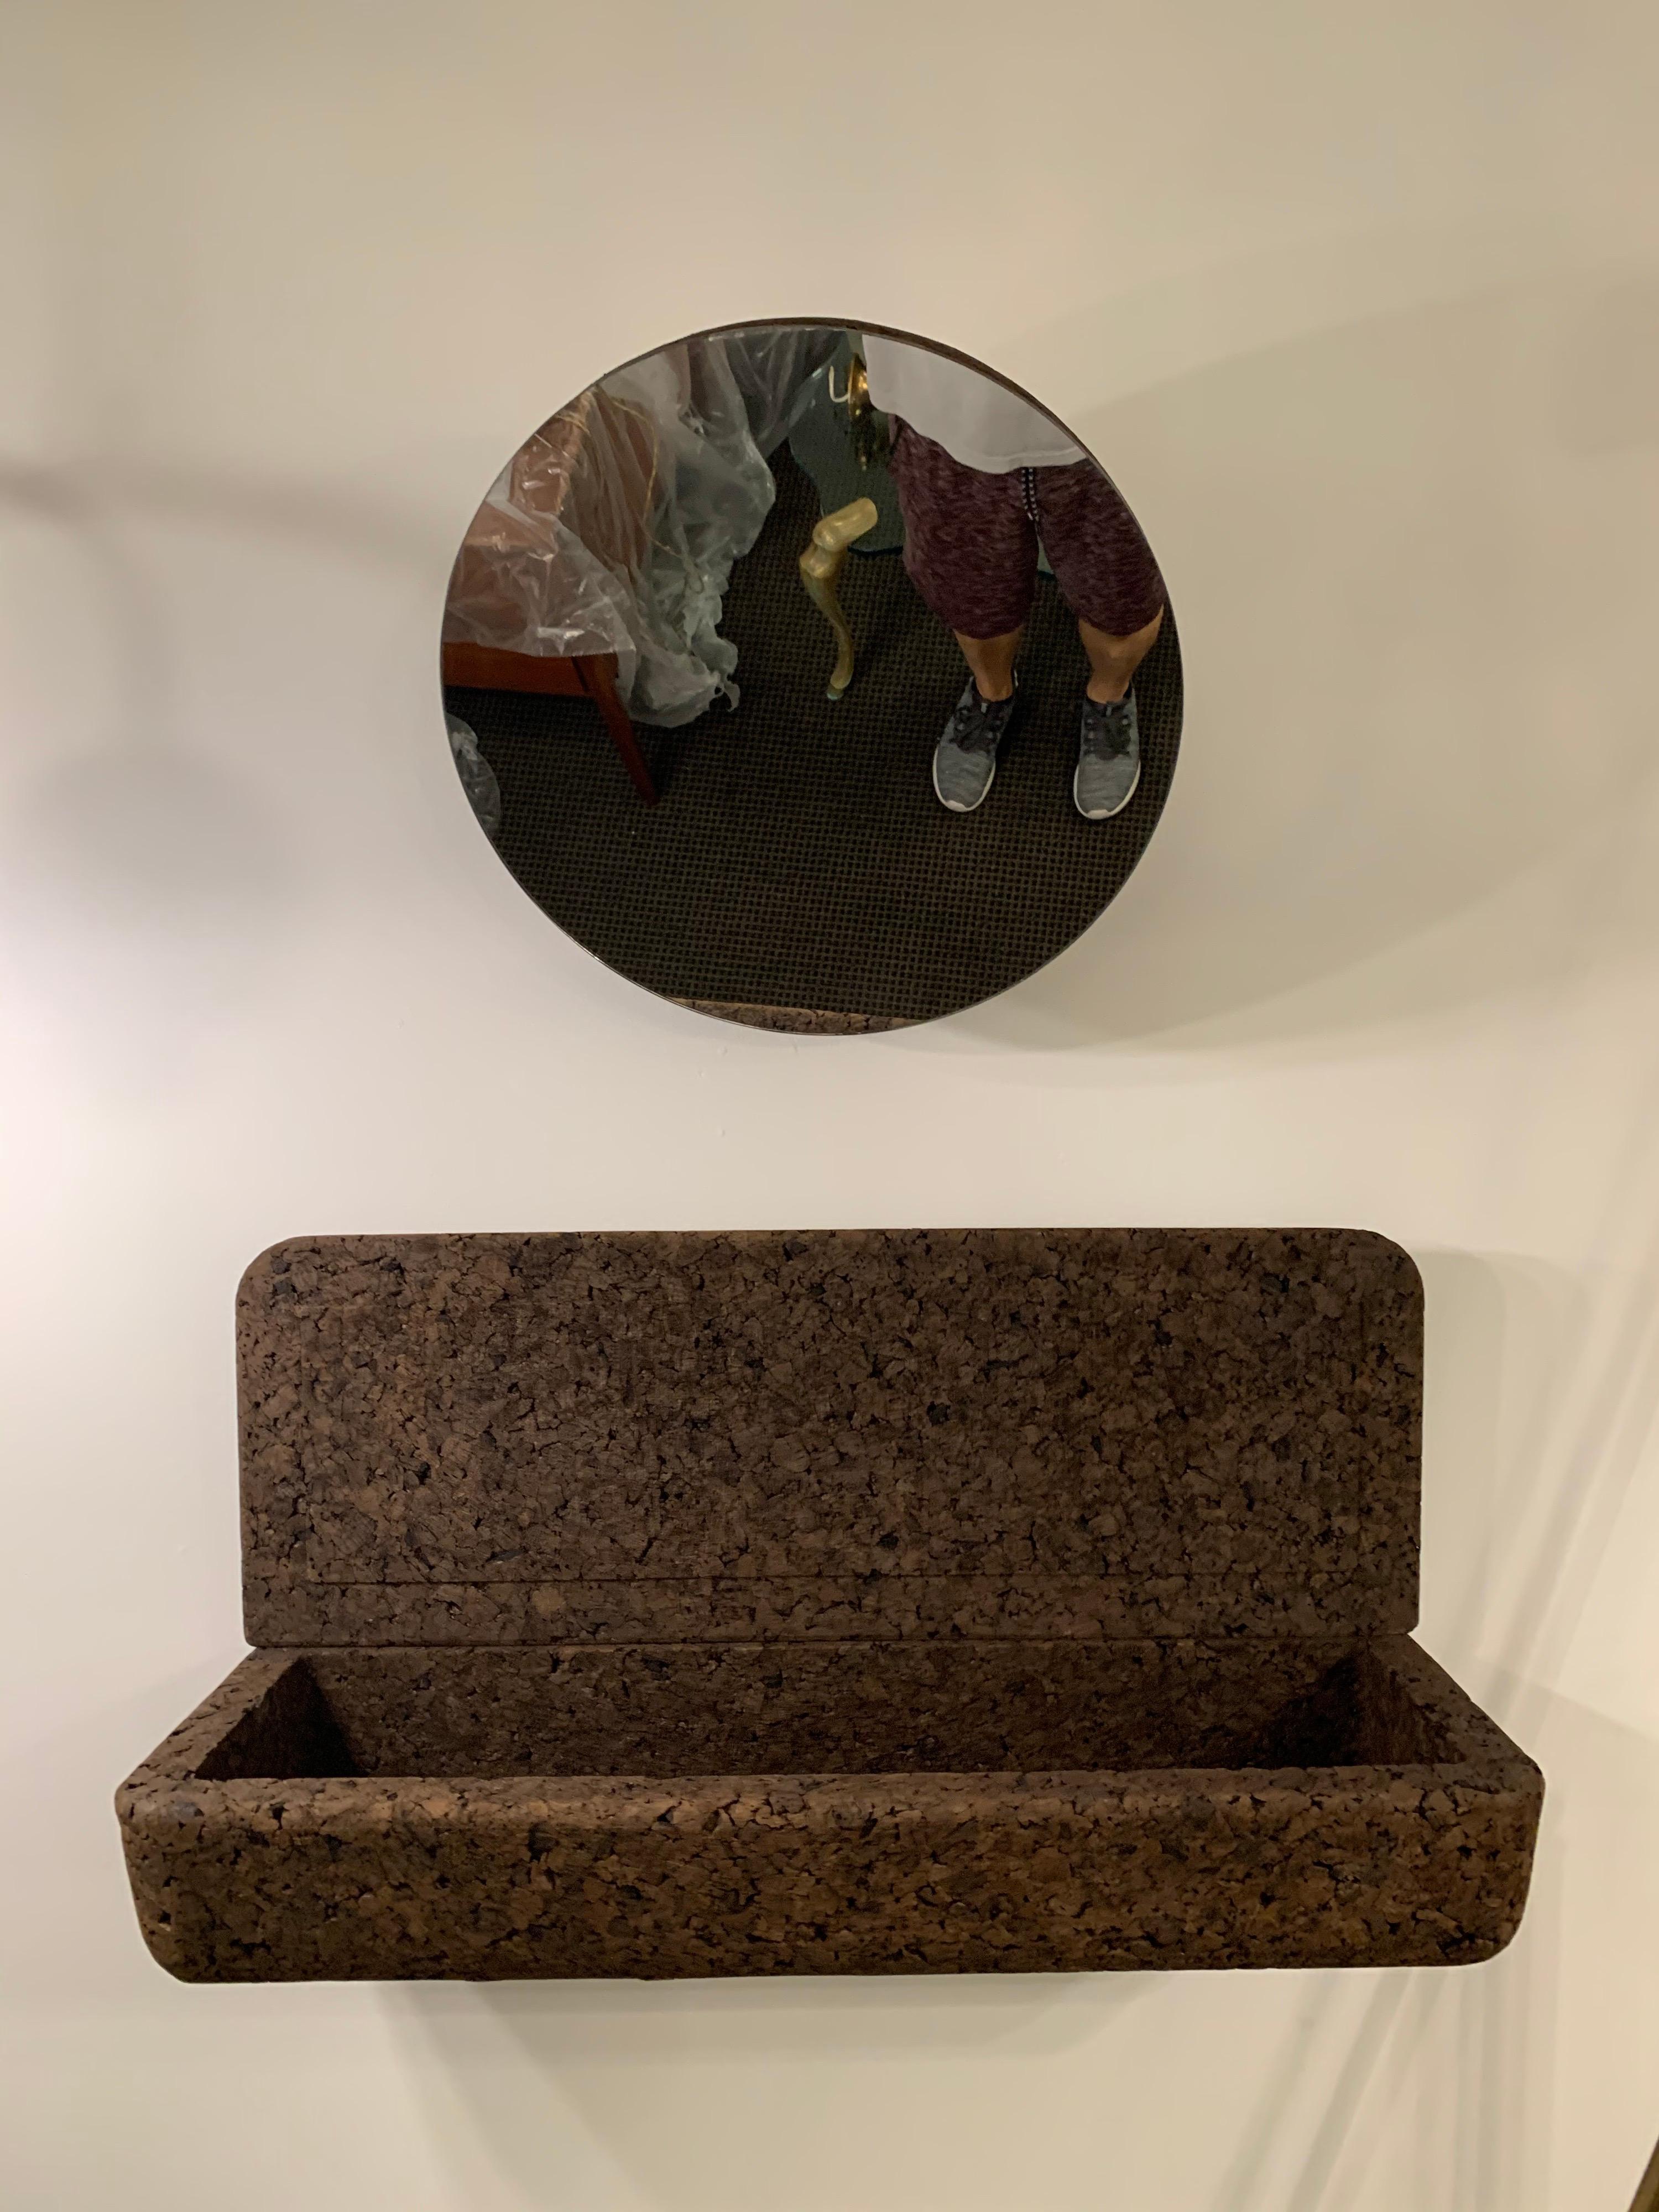 Designed and made in Portugal by Black Cork, this decorative mirror and wall-mounted and lidded shelf are made entirely of locally sourced black cork. The lidded shelf can be covered or left open as a catchall. As pictured in the detail images,